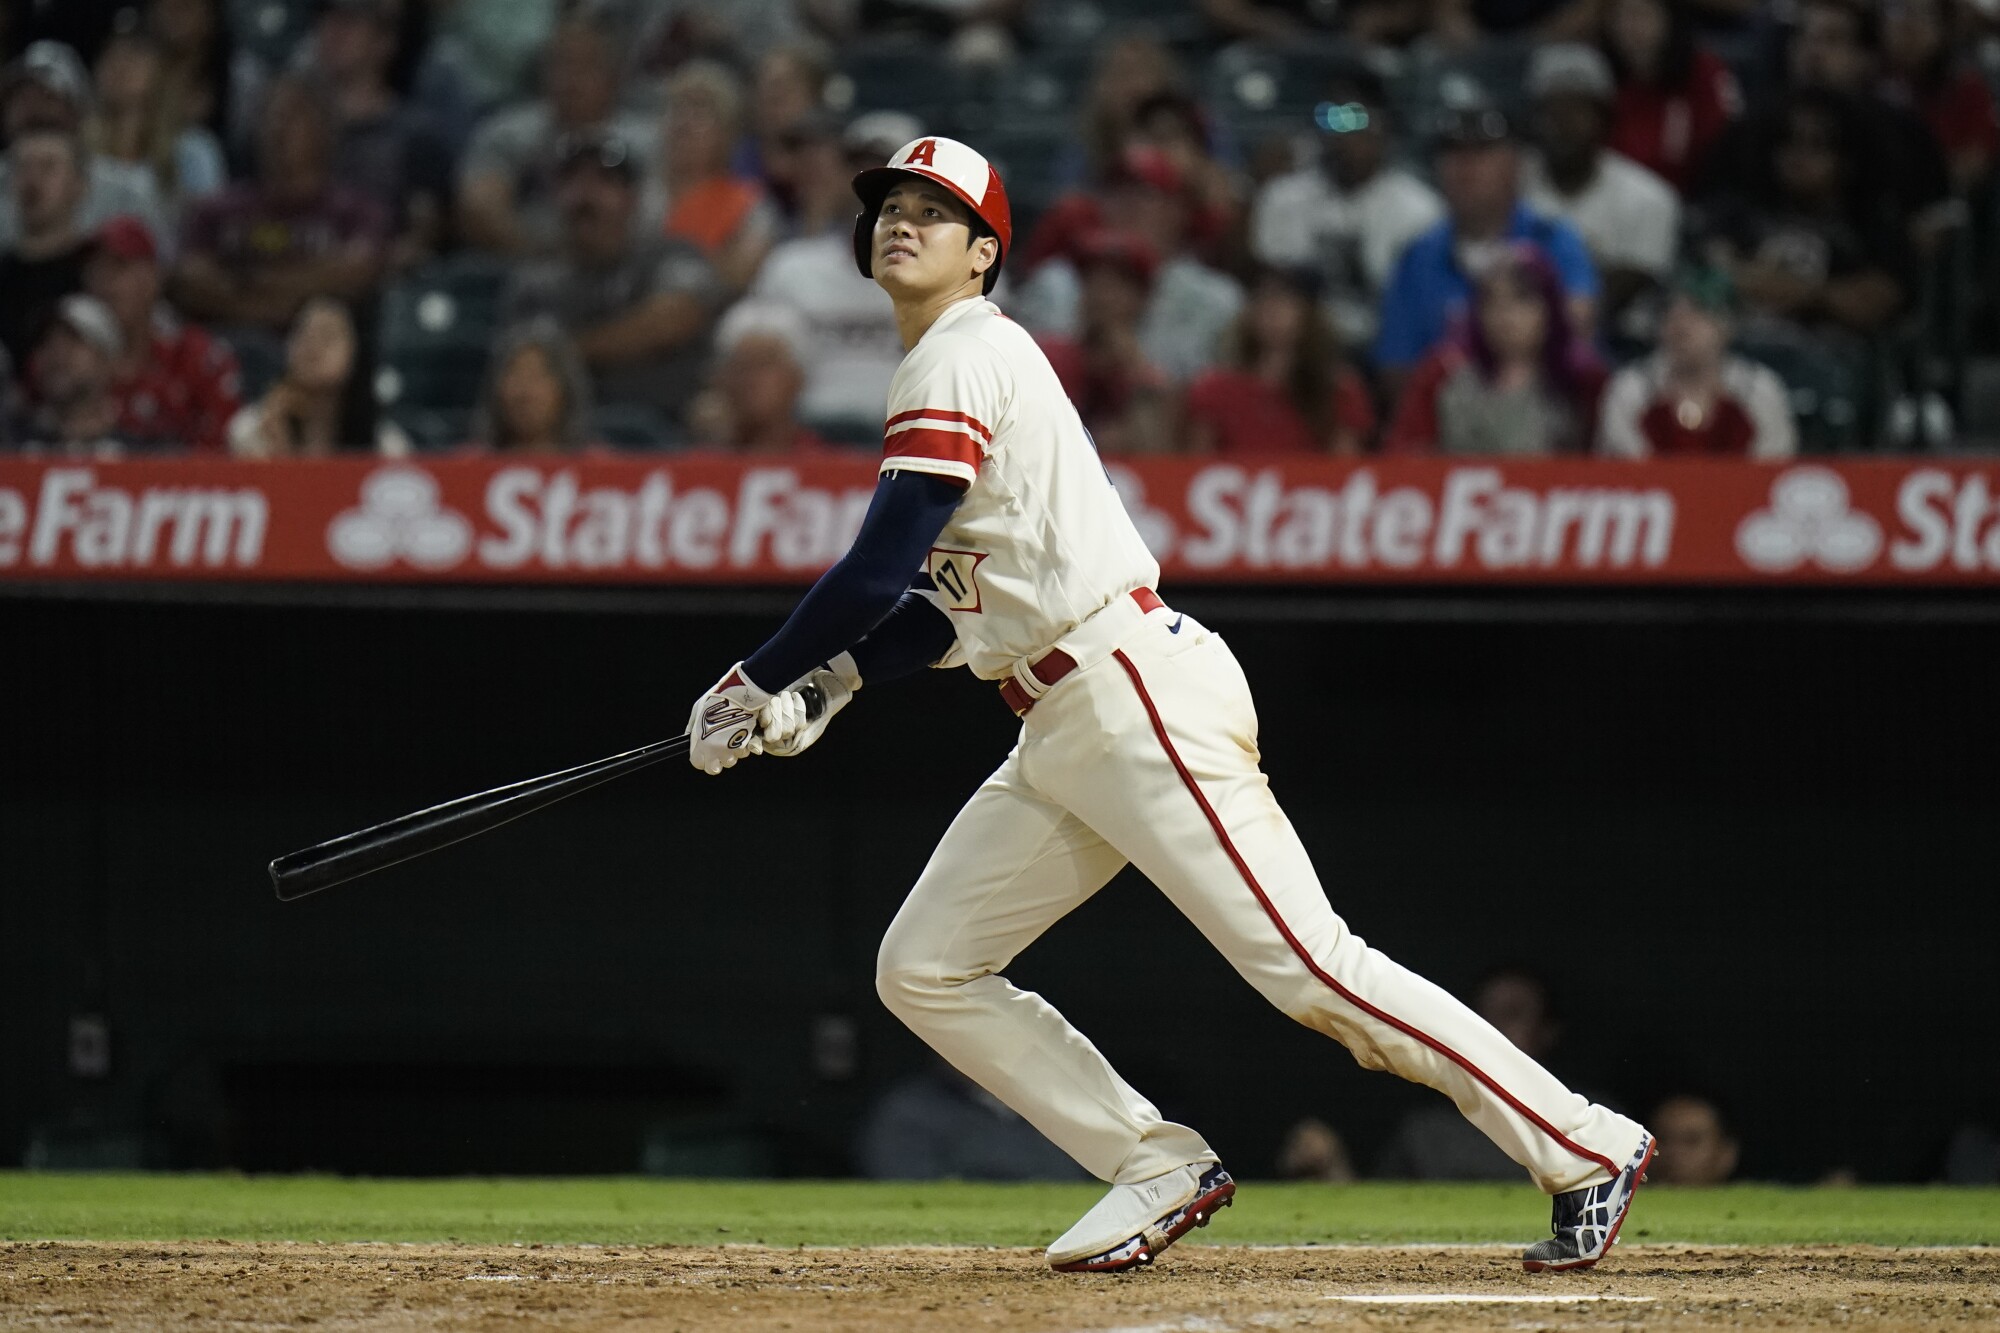 The Angels' Shohei Ohtani watches his RBI double during the seventh inning against the White Sox